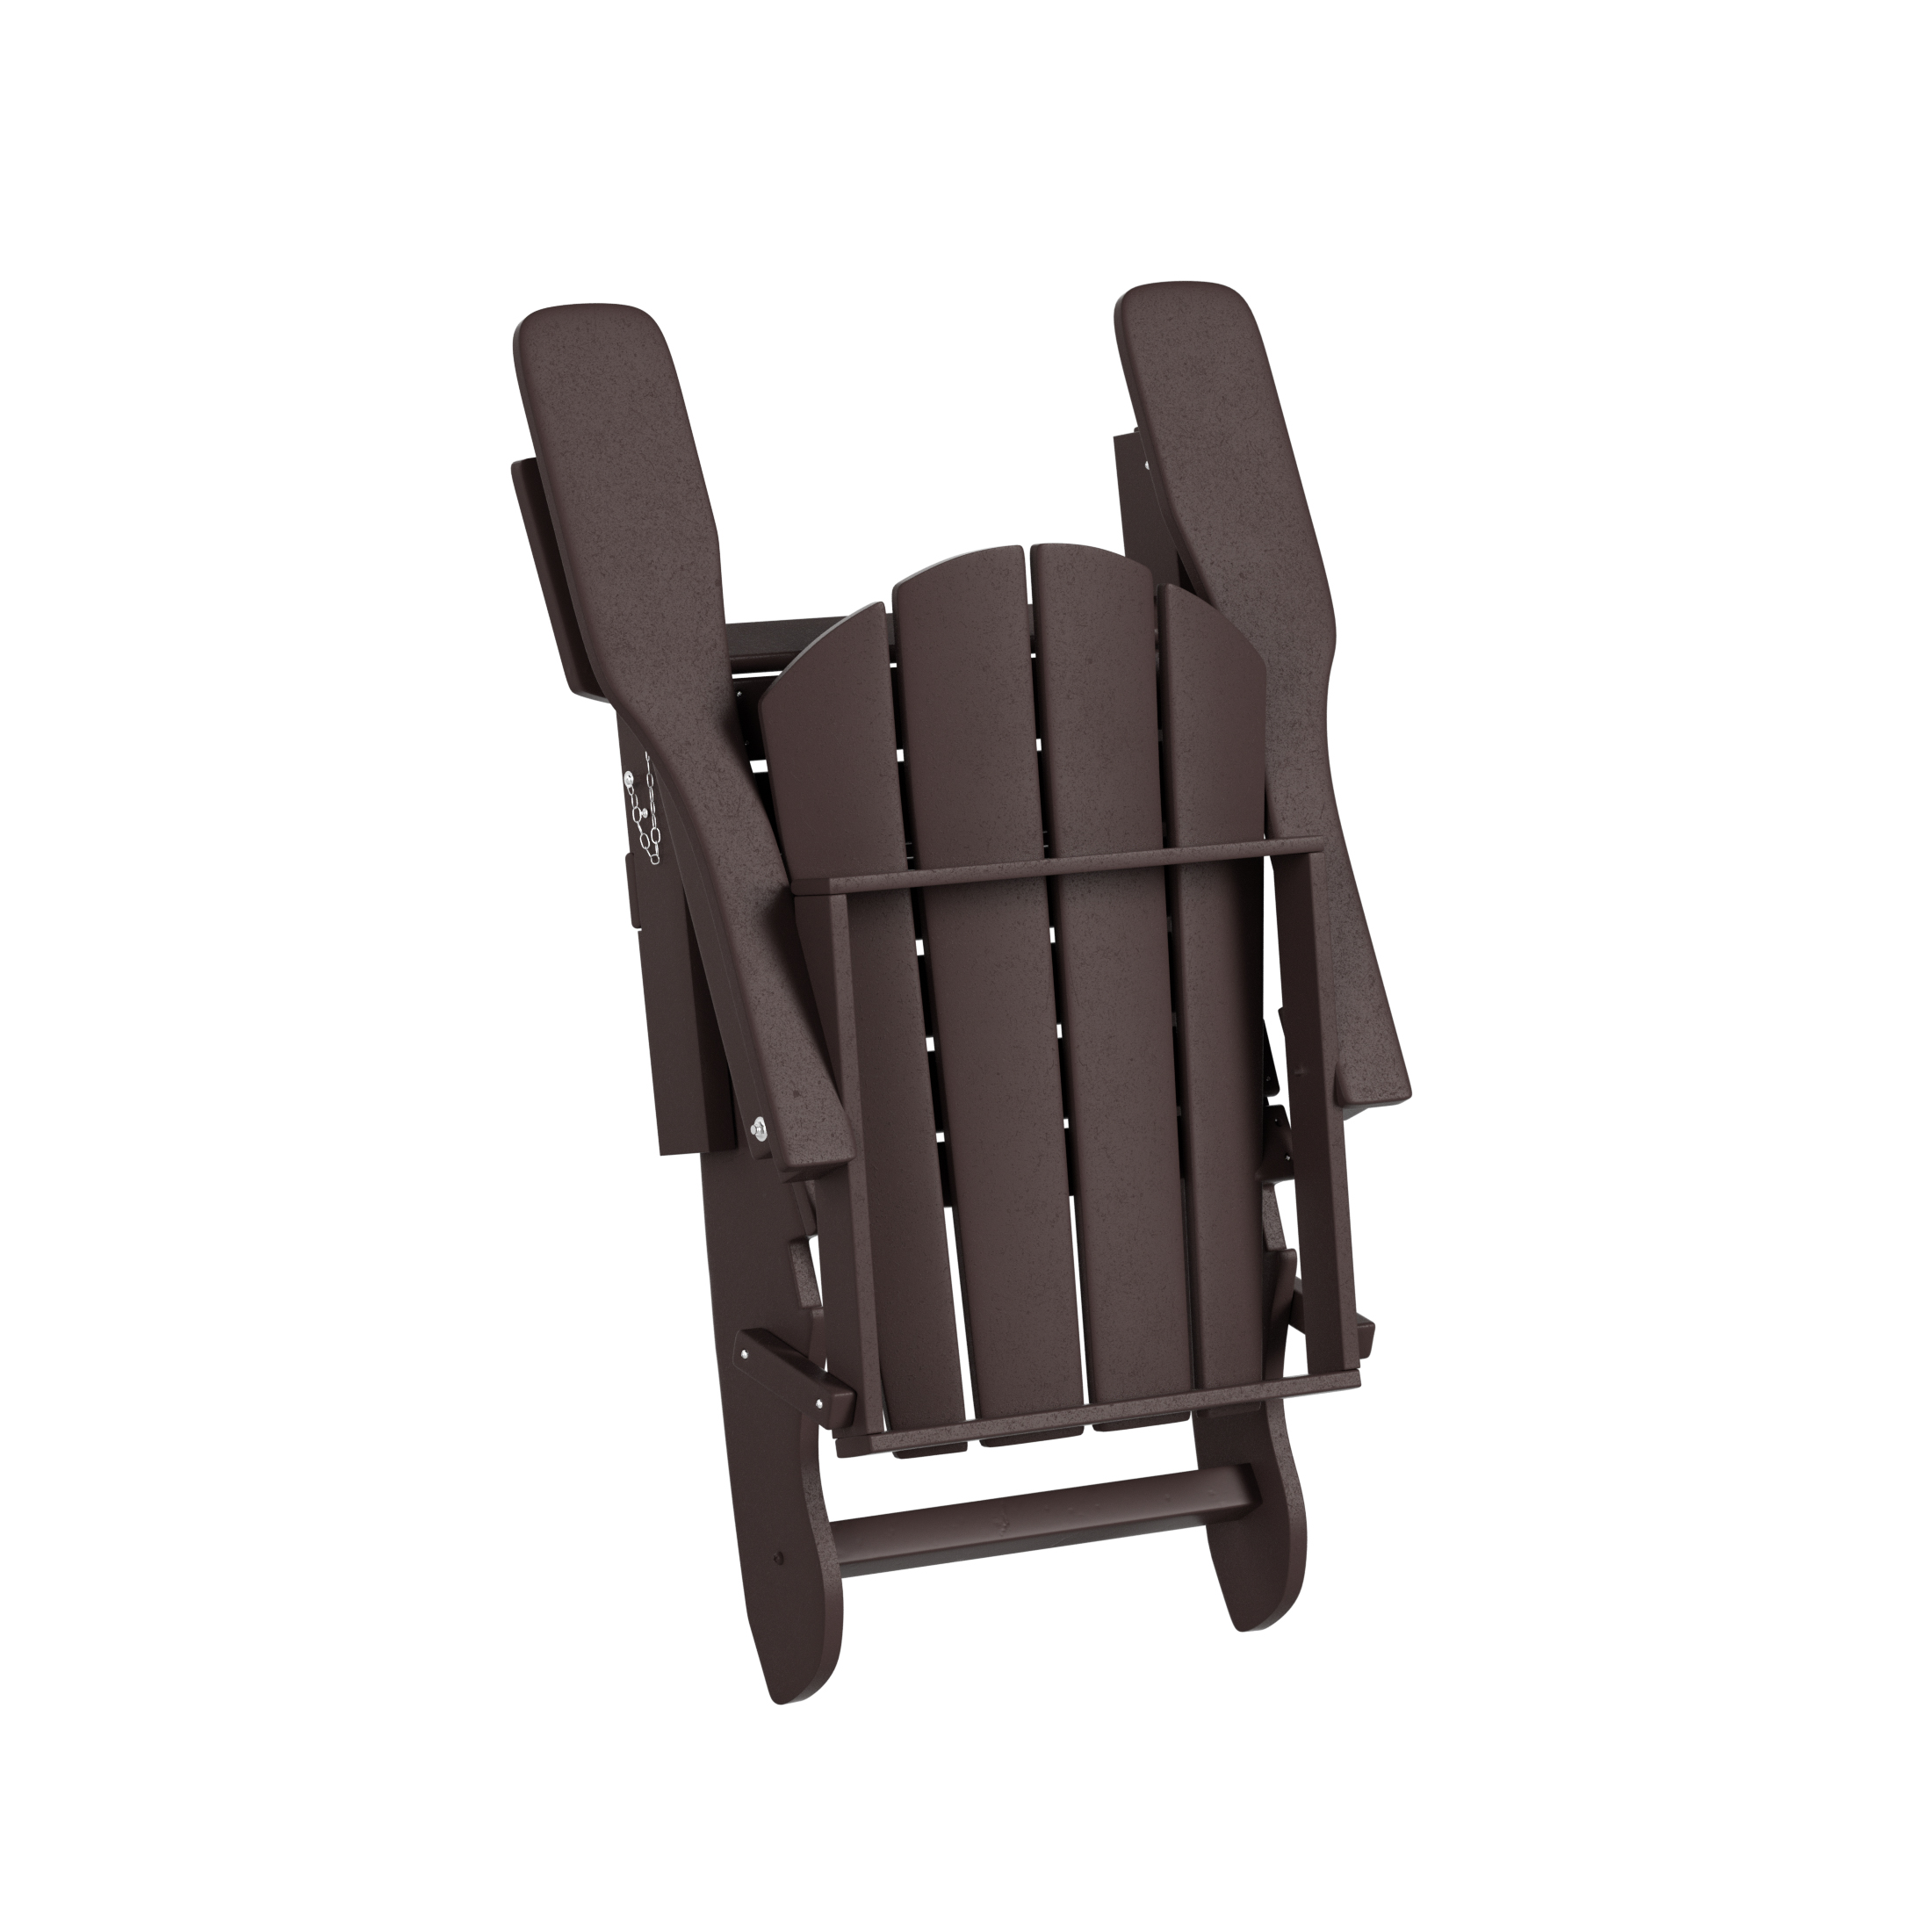 Westintrends Outdoor Folding HDPE Adirondack Chair, Patio Seat, Weather Resistant, Dark Brown - image 4 of 6